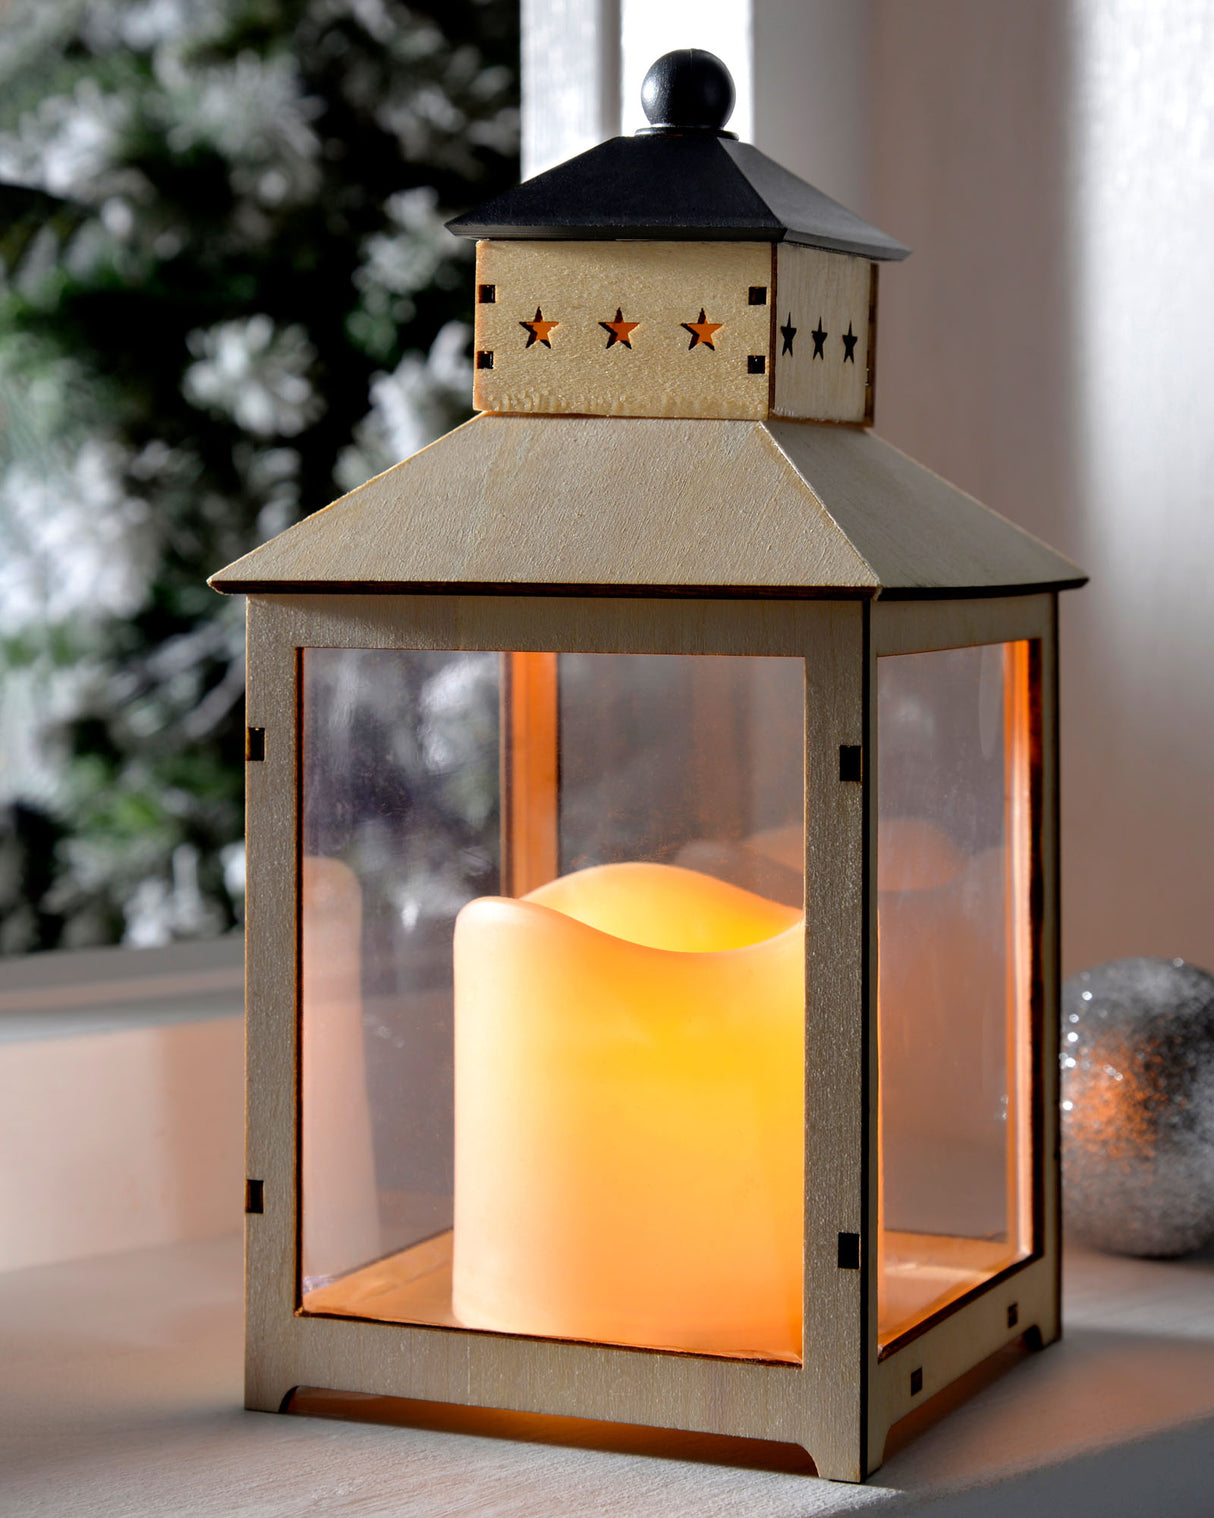 Pre-Lit Wooden Lantern with Flickering LED Candle Christmas Decoration, 21.5 cm